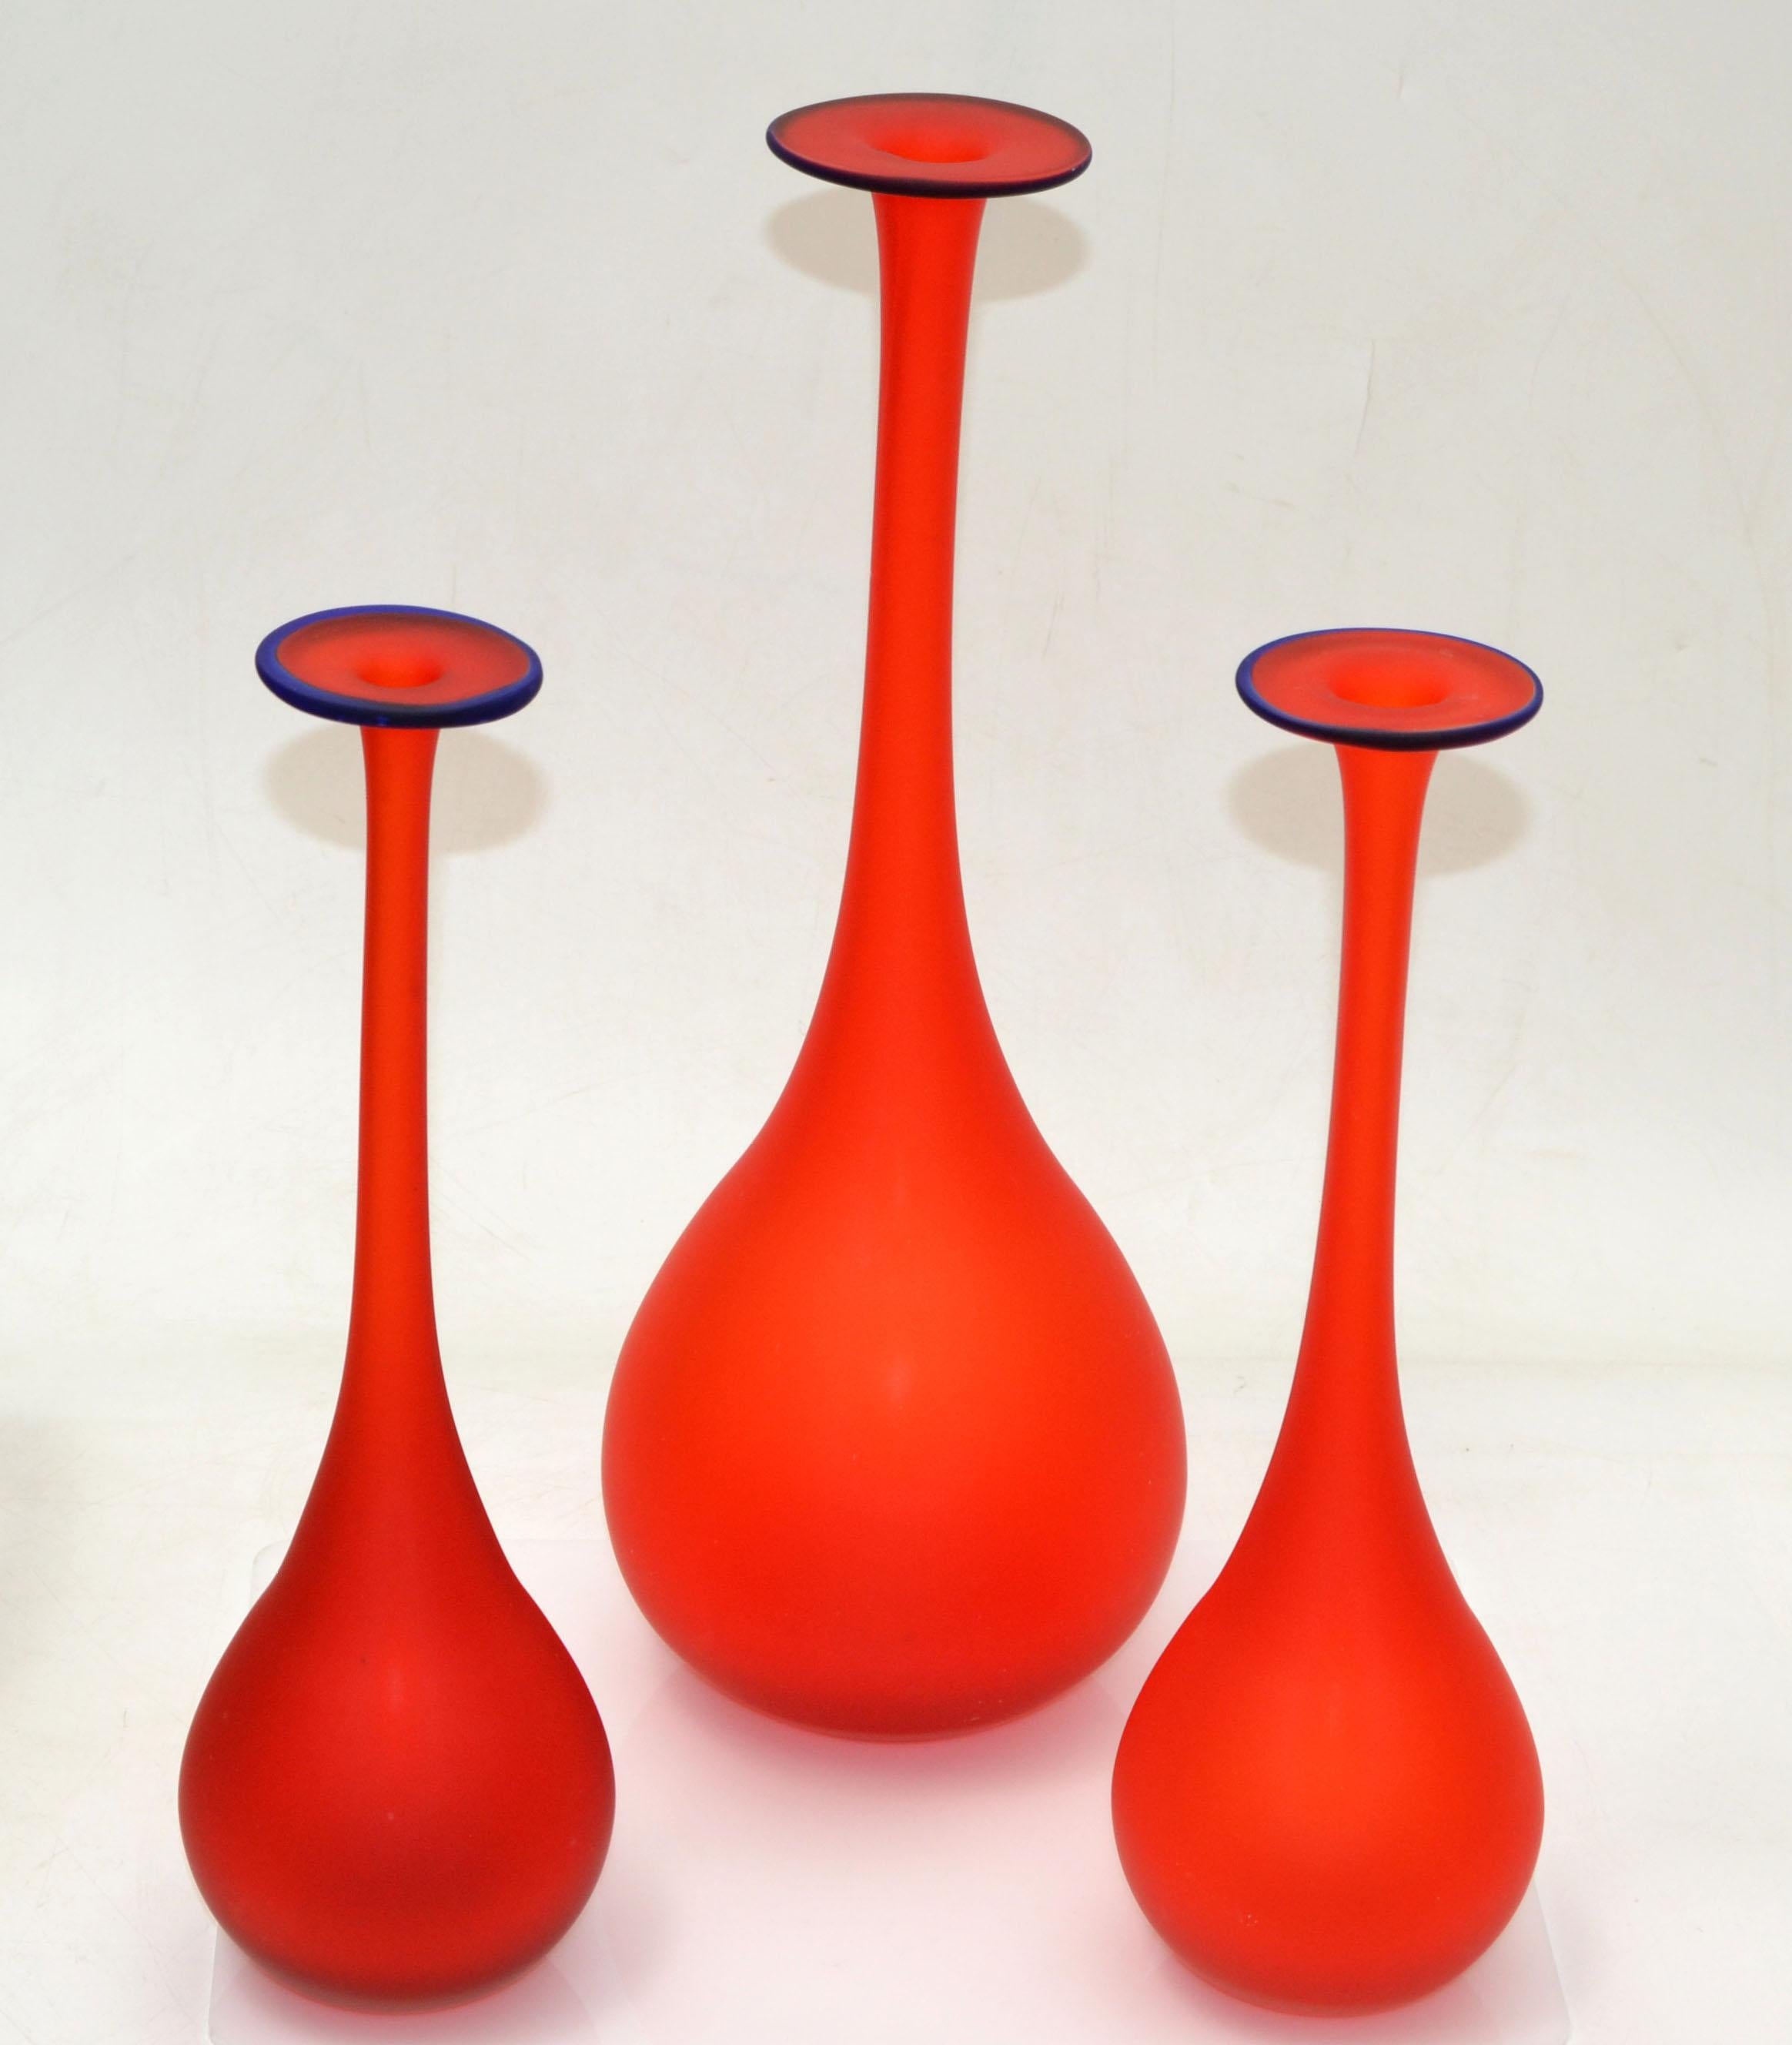 Set of 3 Carlo Moretti Style Mid-Century Modern satin glass bud vases in translucent red with a blue opening.
Nesting Set, the smaller ones are 3.5 inches in diameter, Height 11.5 & 12 inches.
Very beautiful and clean design.

 